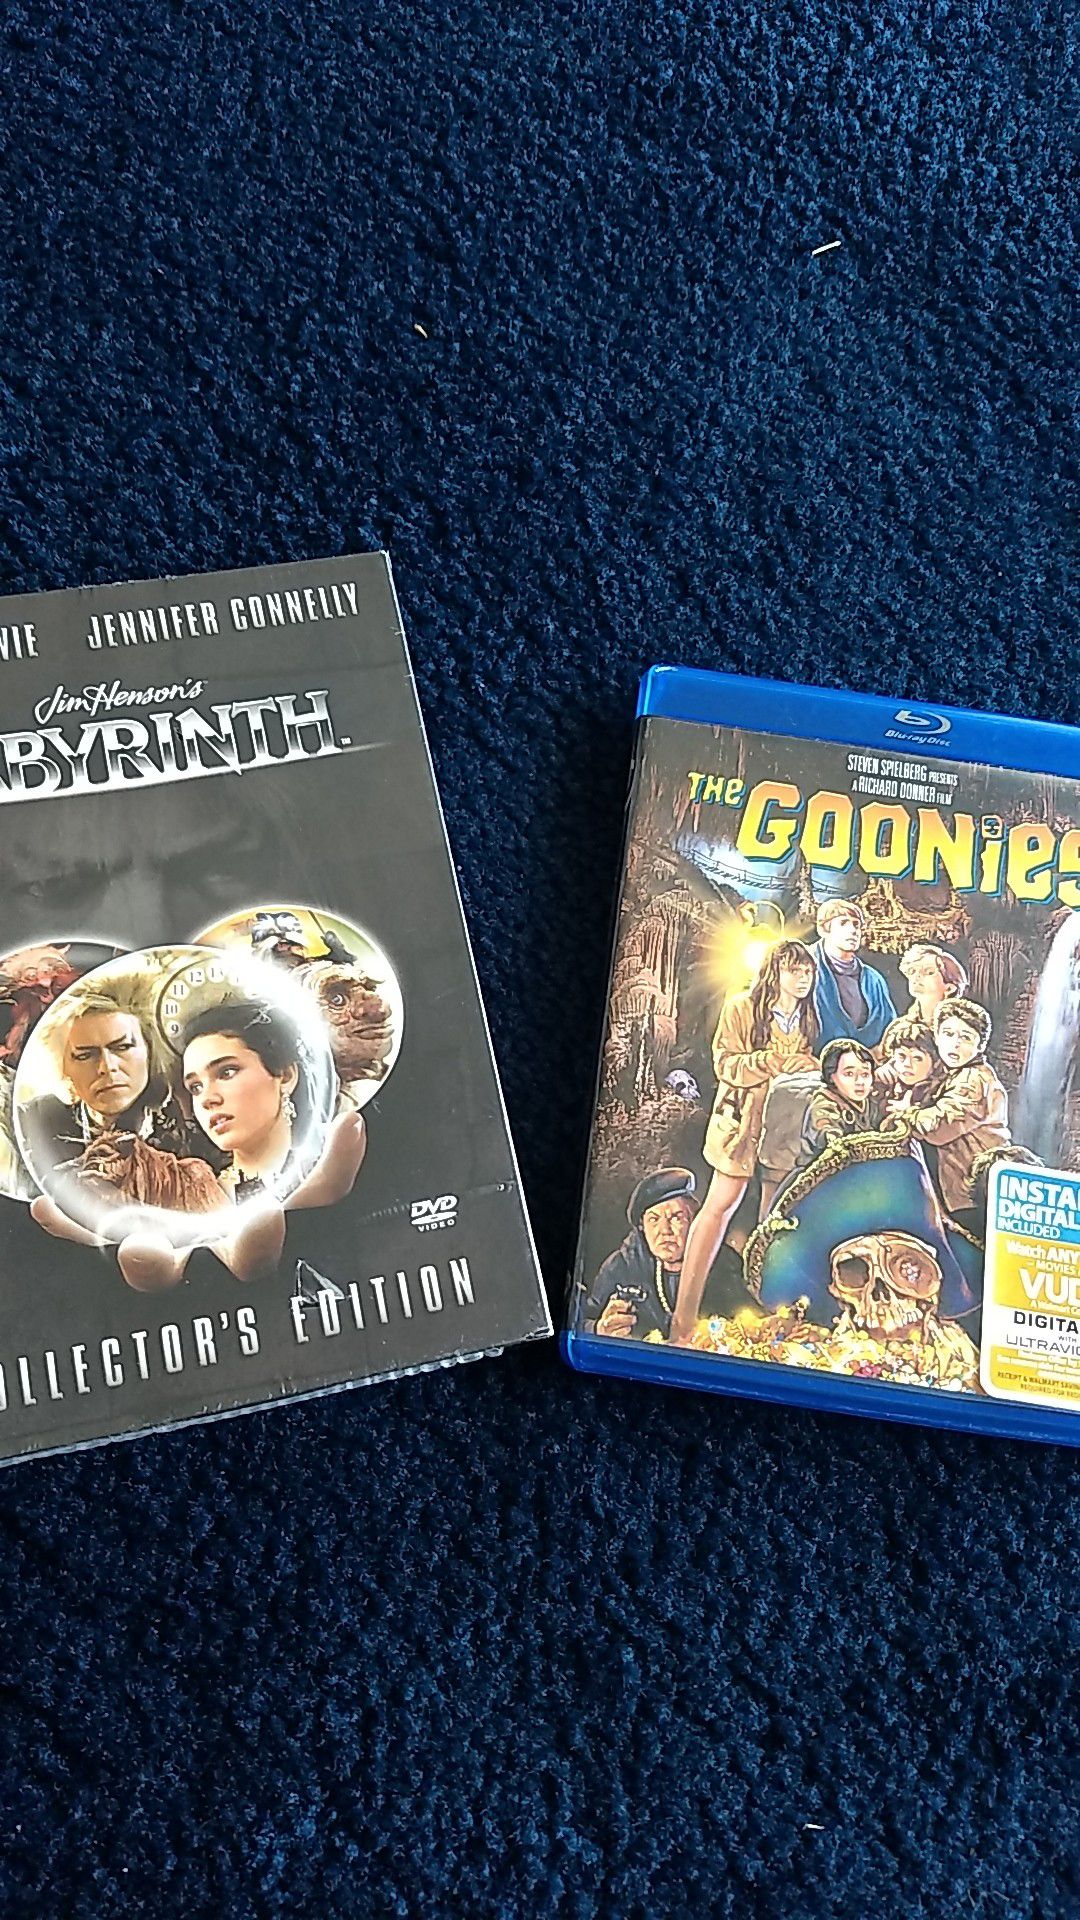 Labyrinth collectors edition & Goonies